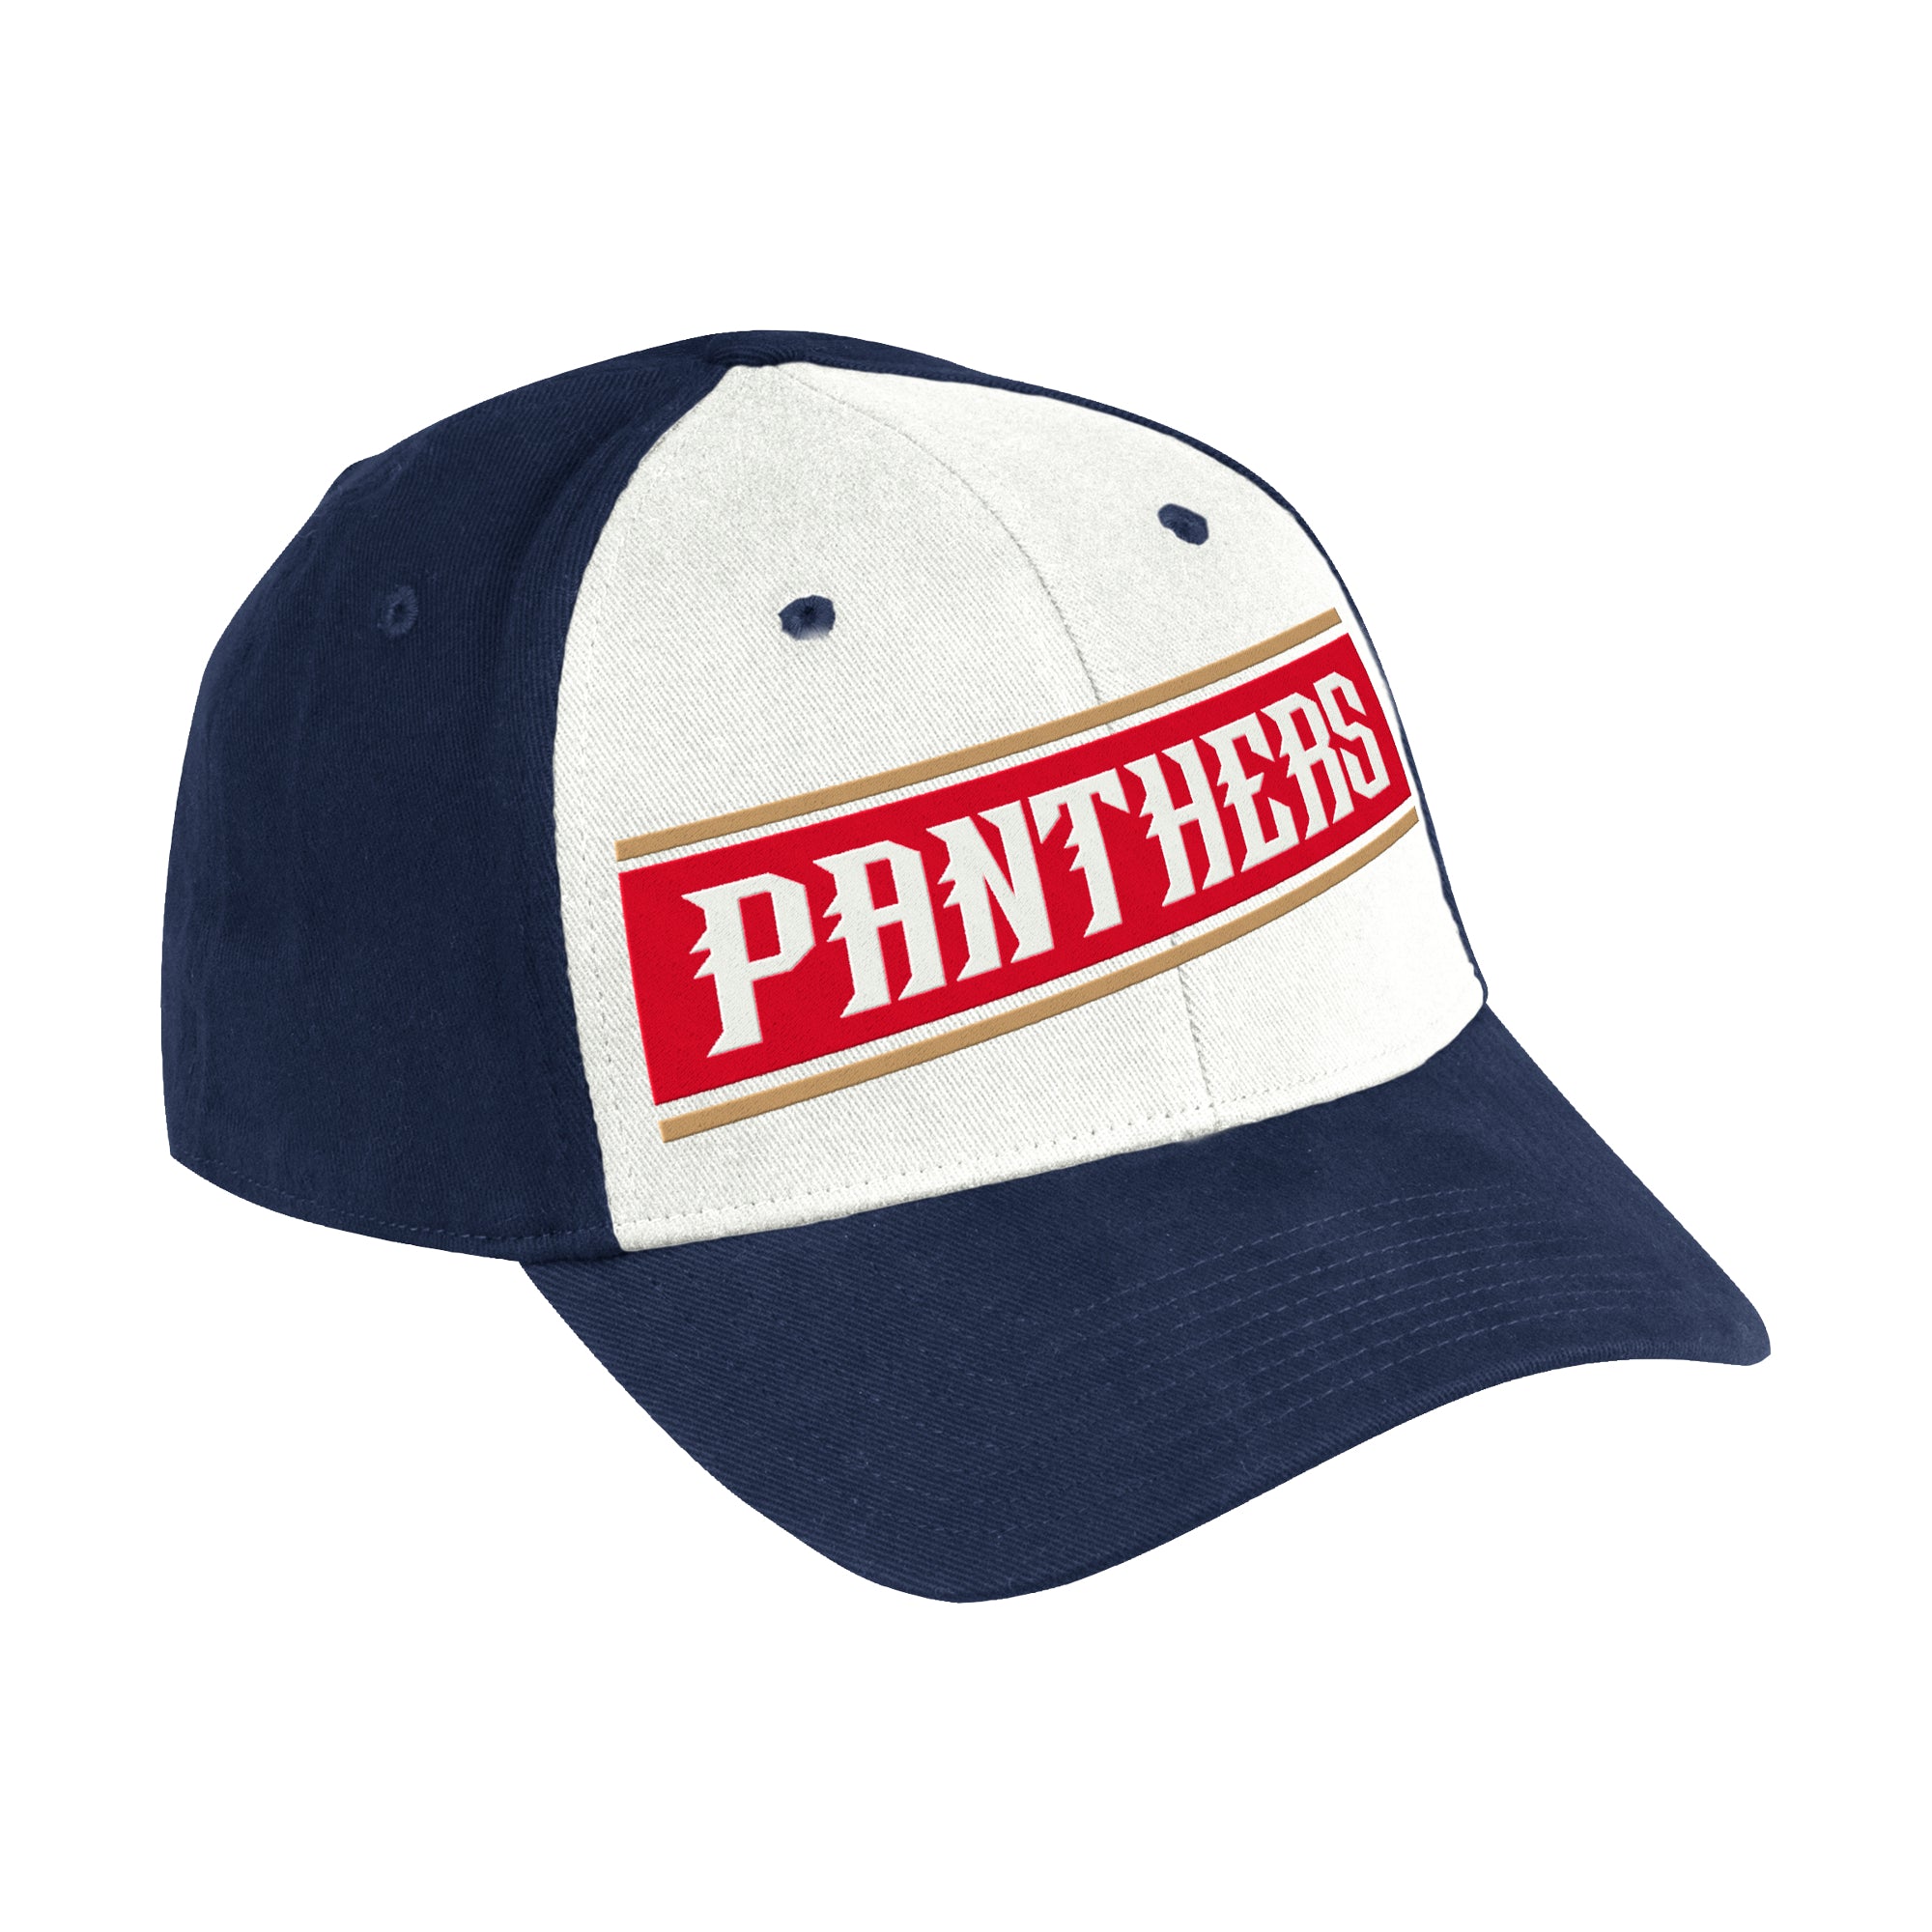 Florida Panthers Stretch Flex Fit Cap - White Navy